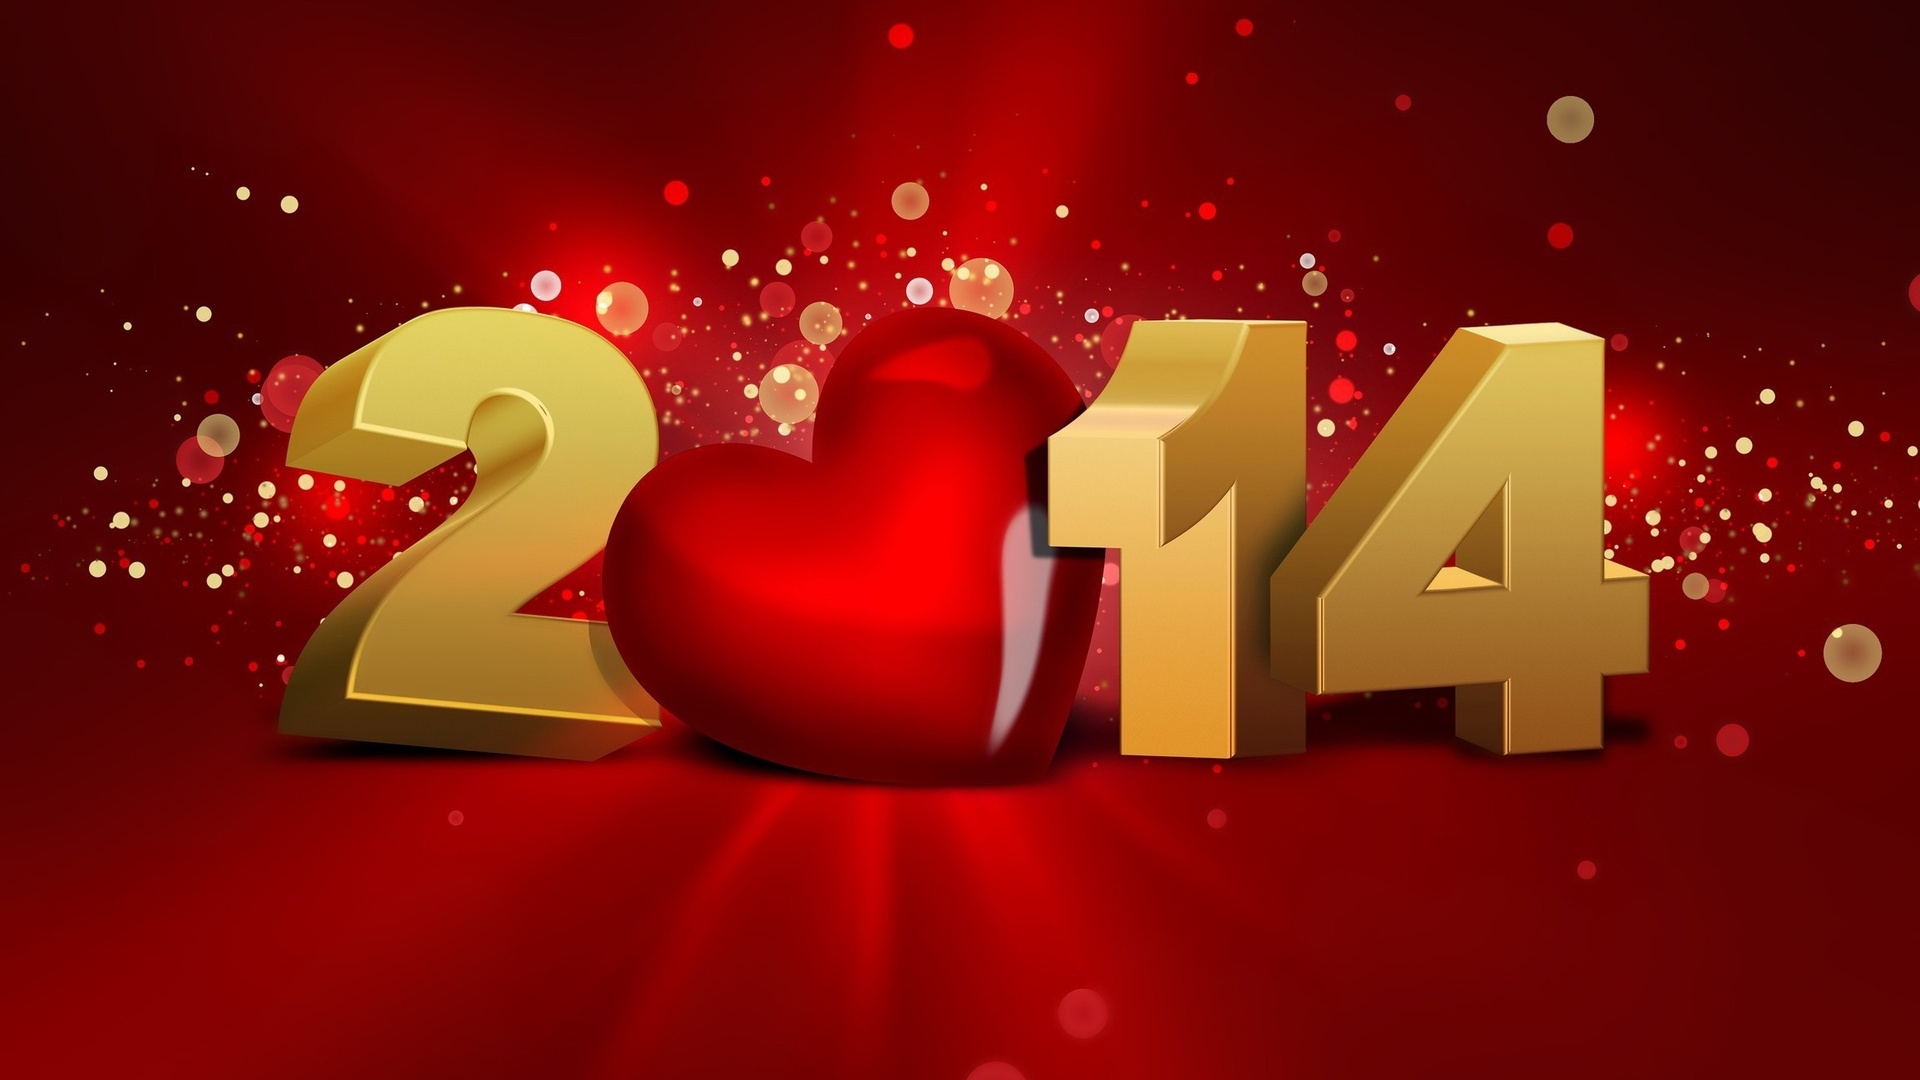 new wallpaper 2014,text,red,valentine's day,heart,font